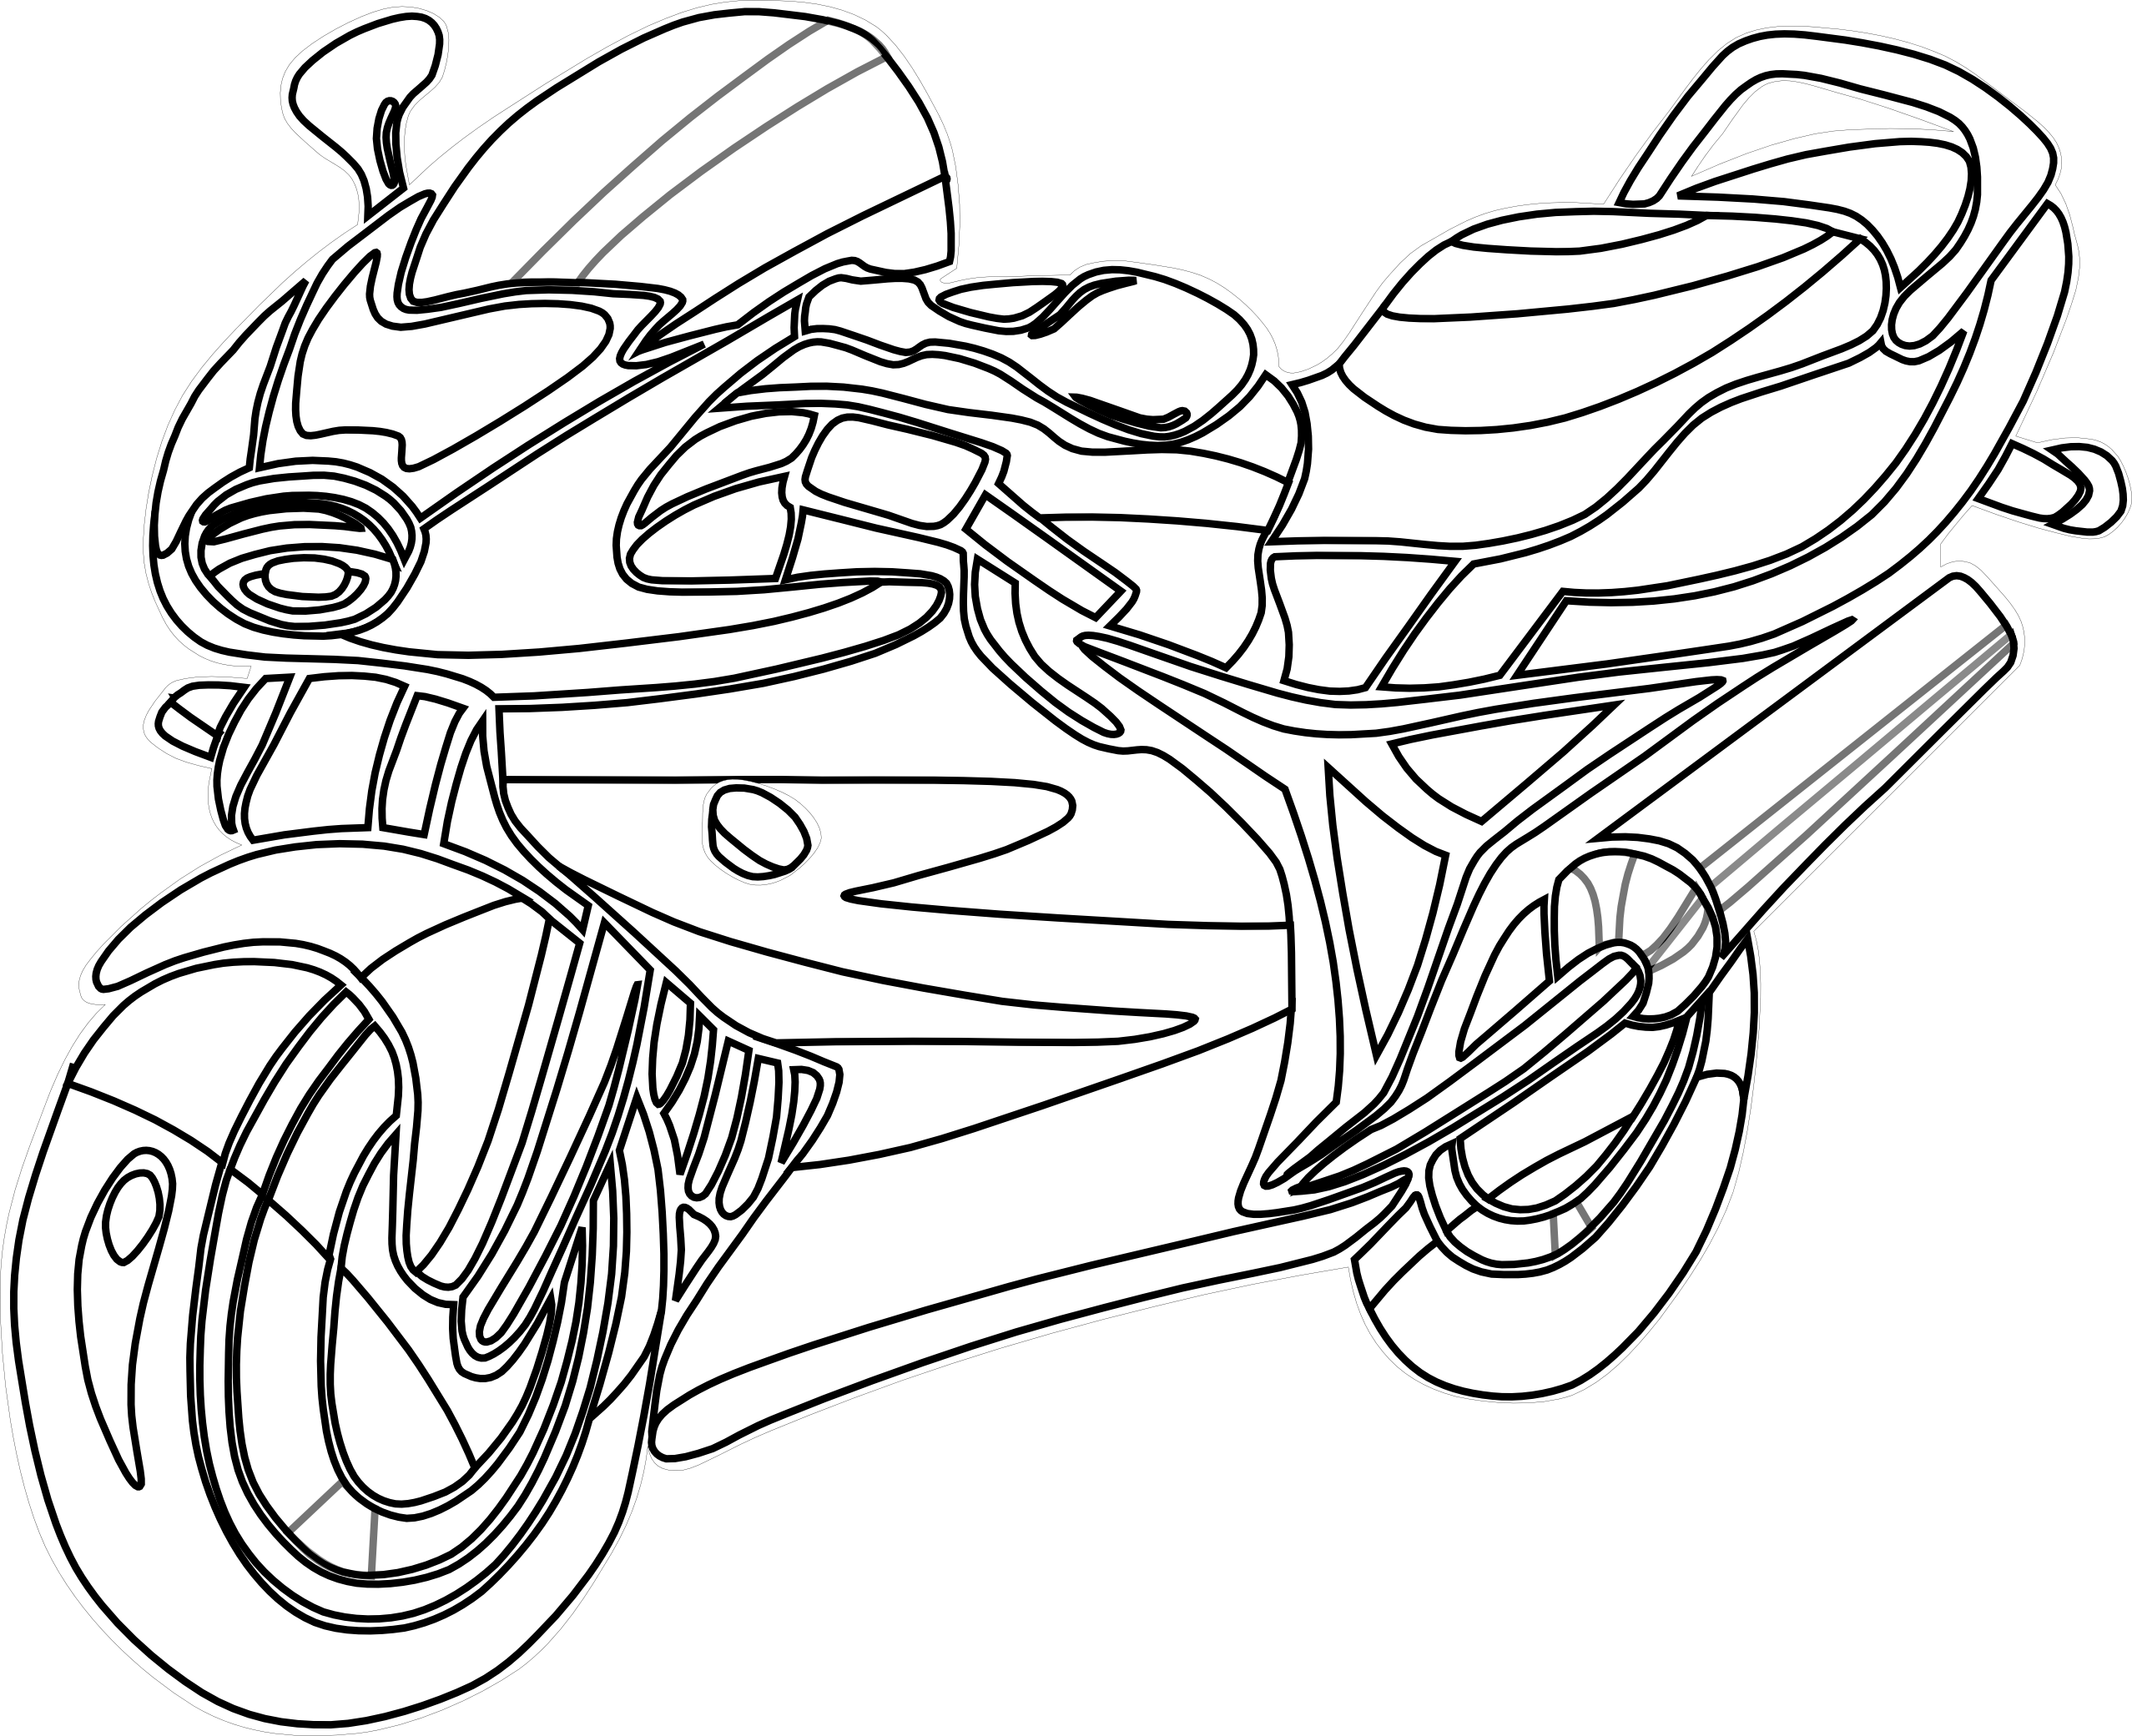 Motorcycle  black and white motorcycle clipart black and white free